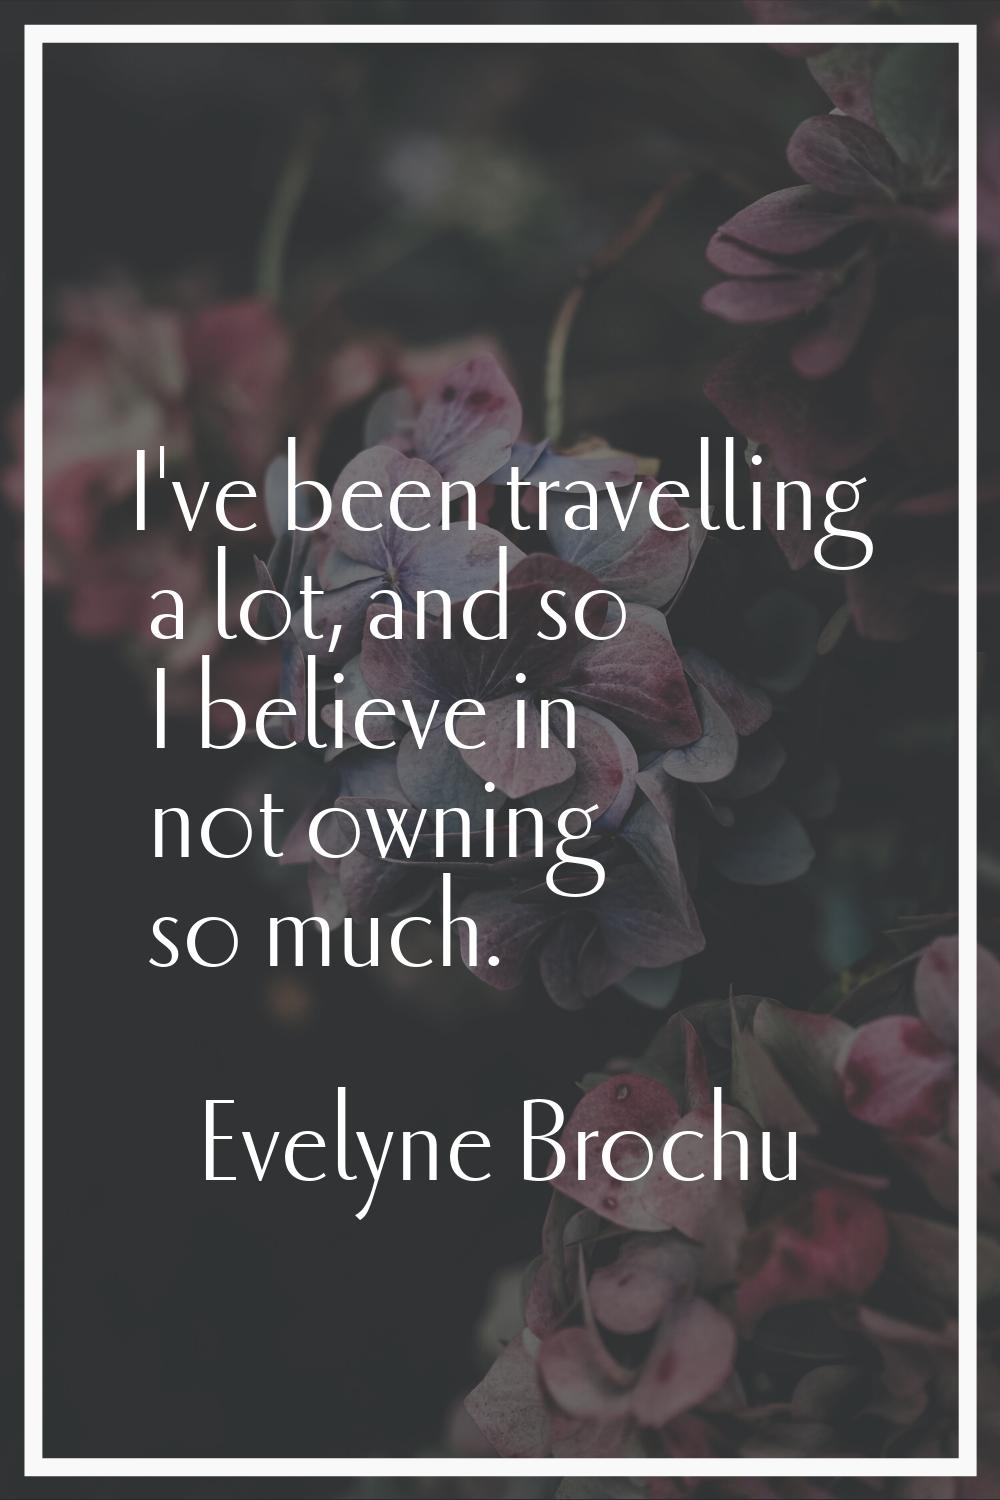 I've been travelling a lot, and so I believe in not owning so much.